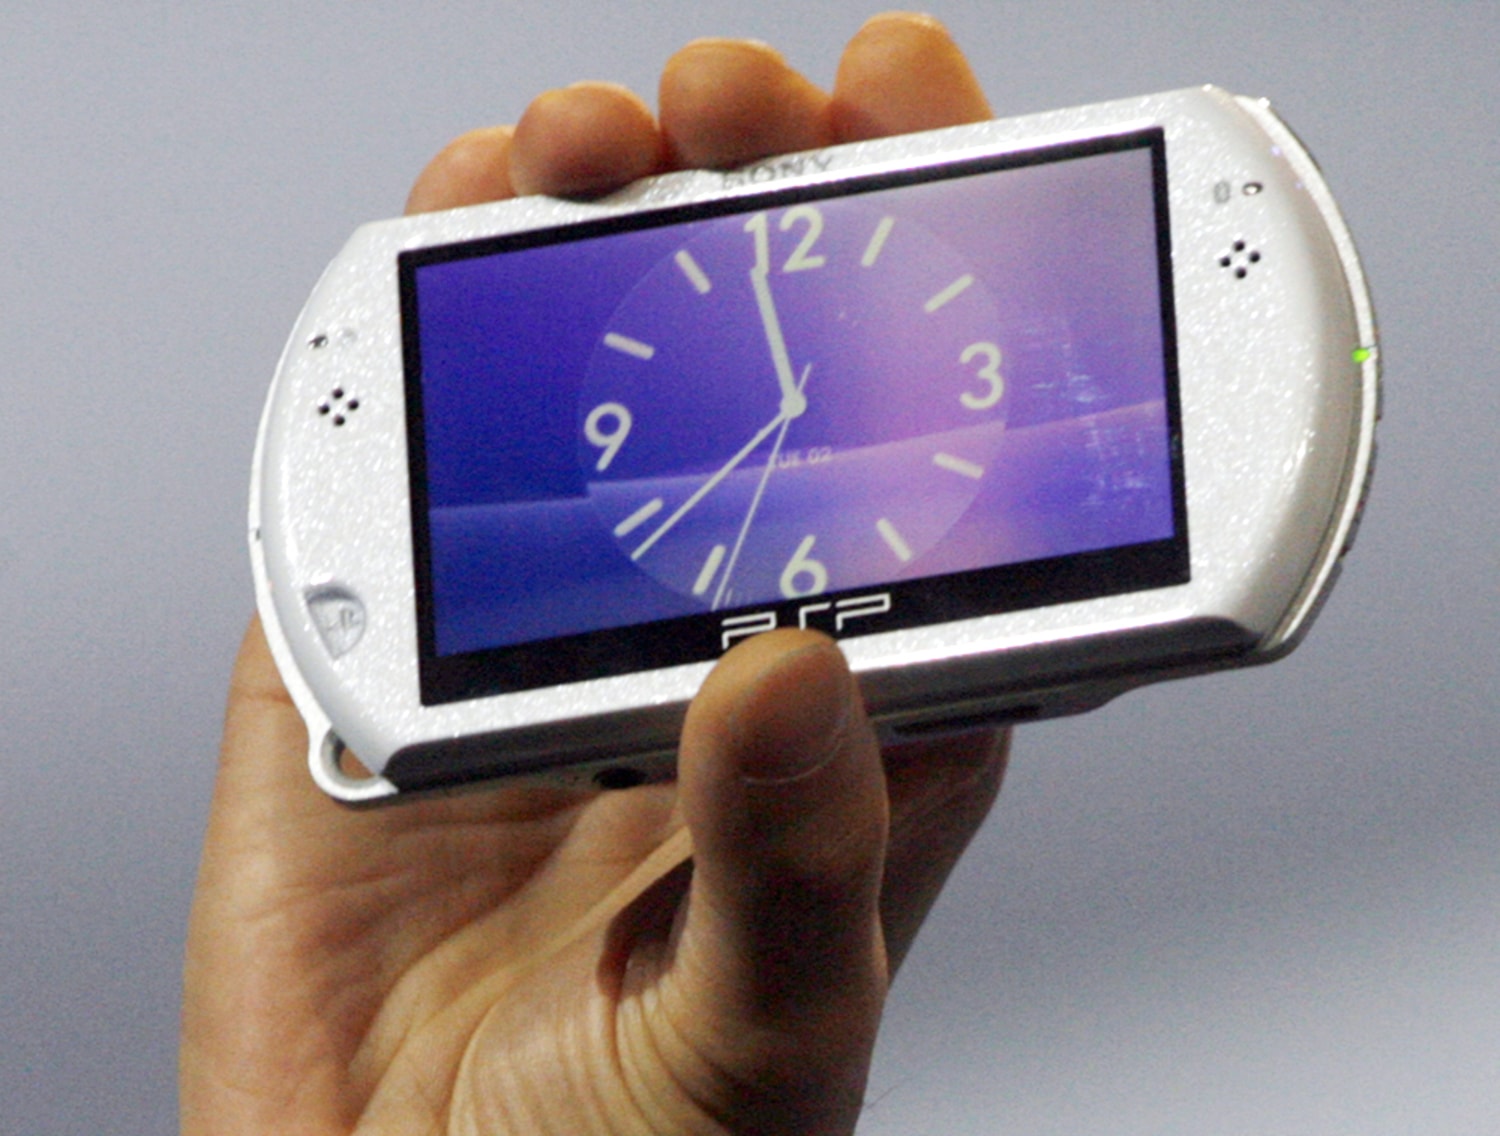 Sony announces new PSP for $199, but it's not what you think